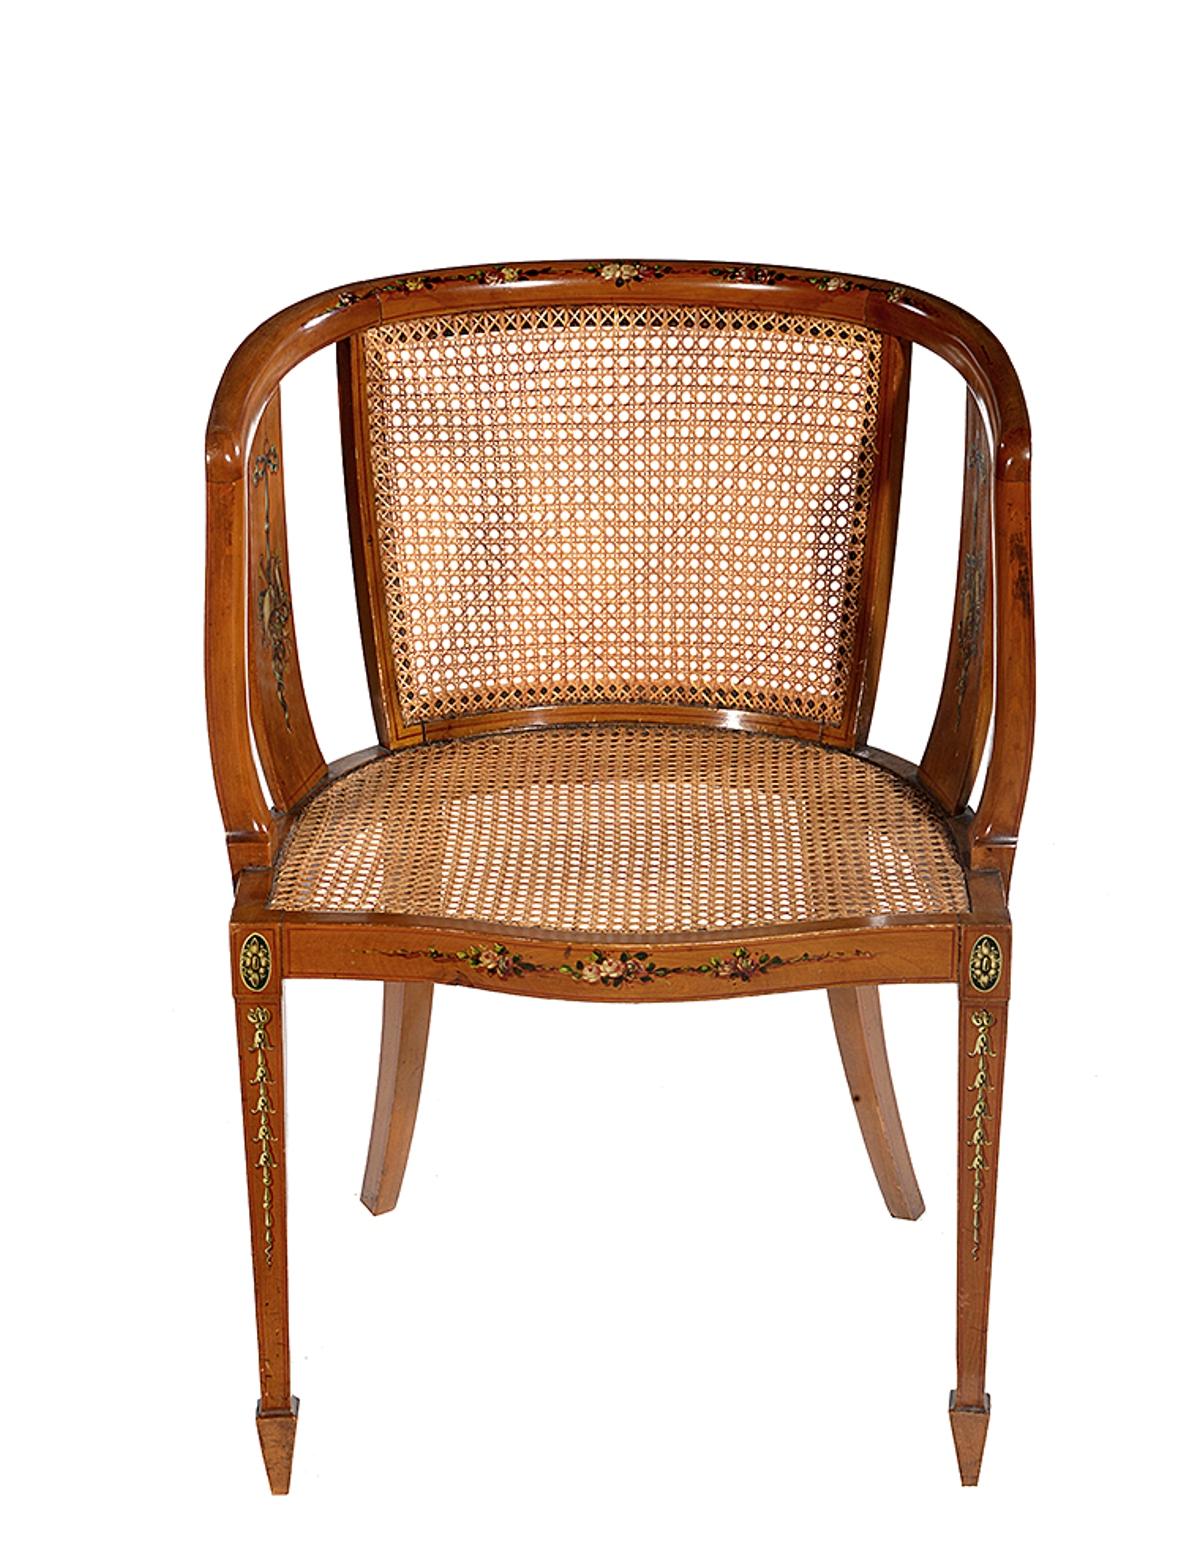 Sheraton Style Satinwood Chair with Painted Decoration In Good Condition For Sale In Hemel Hempstead, Hertfordshire